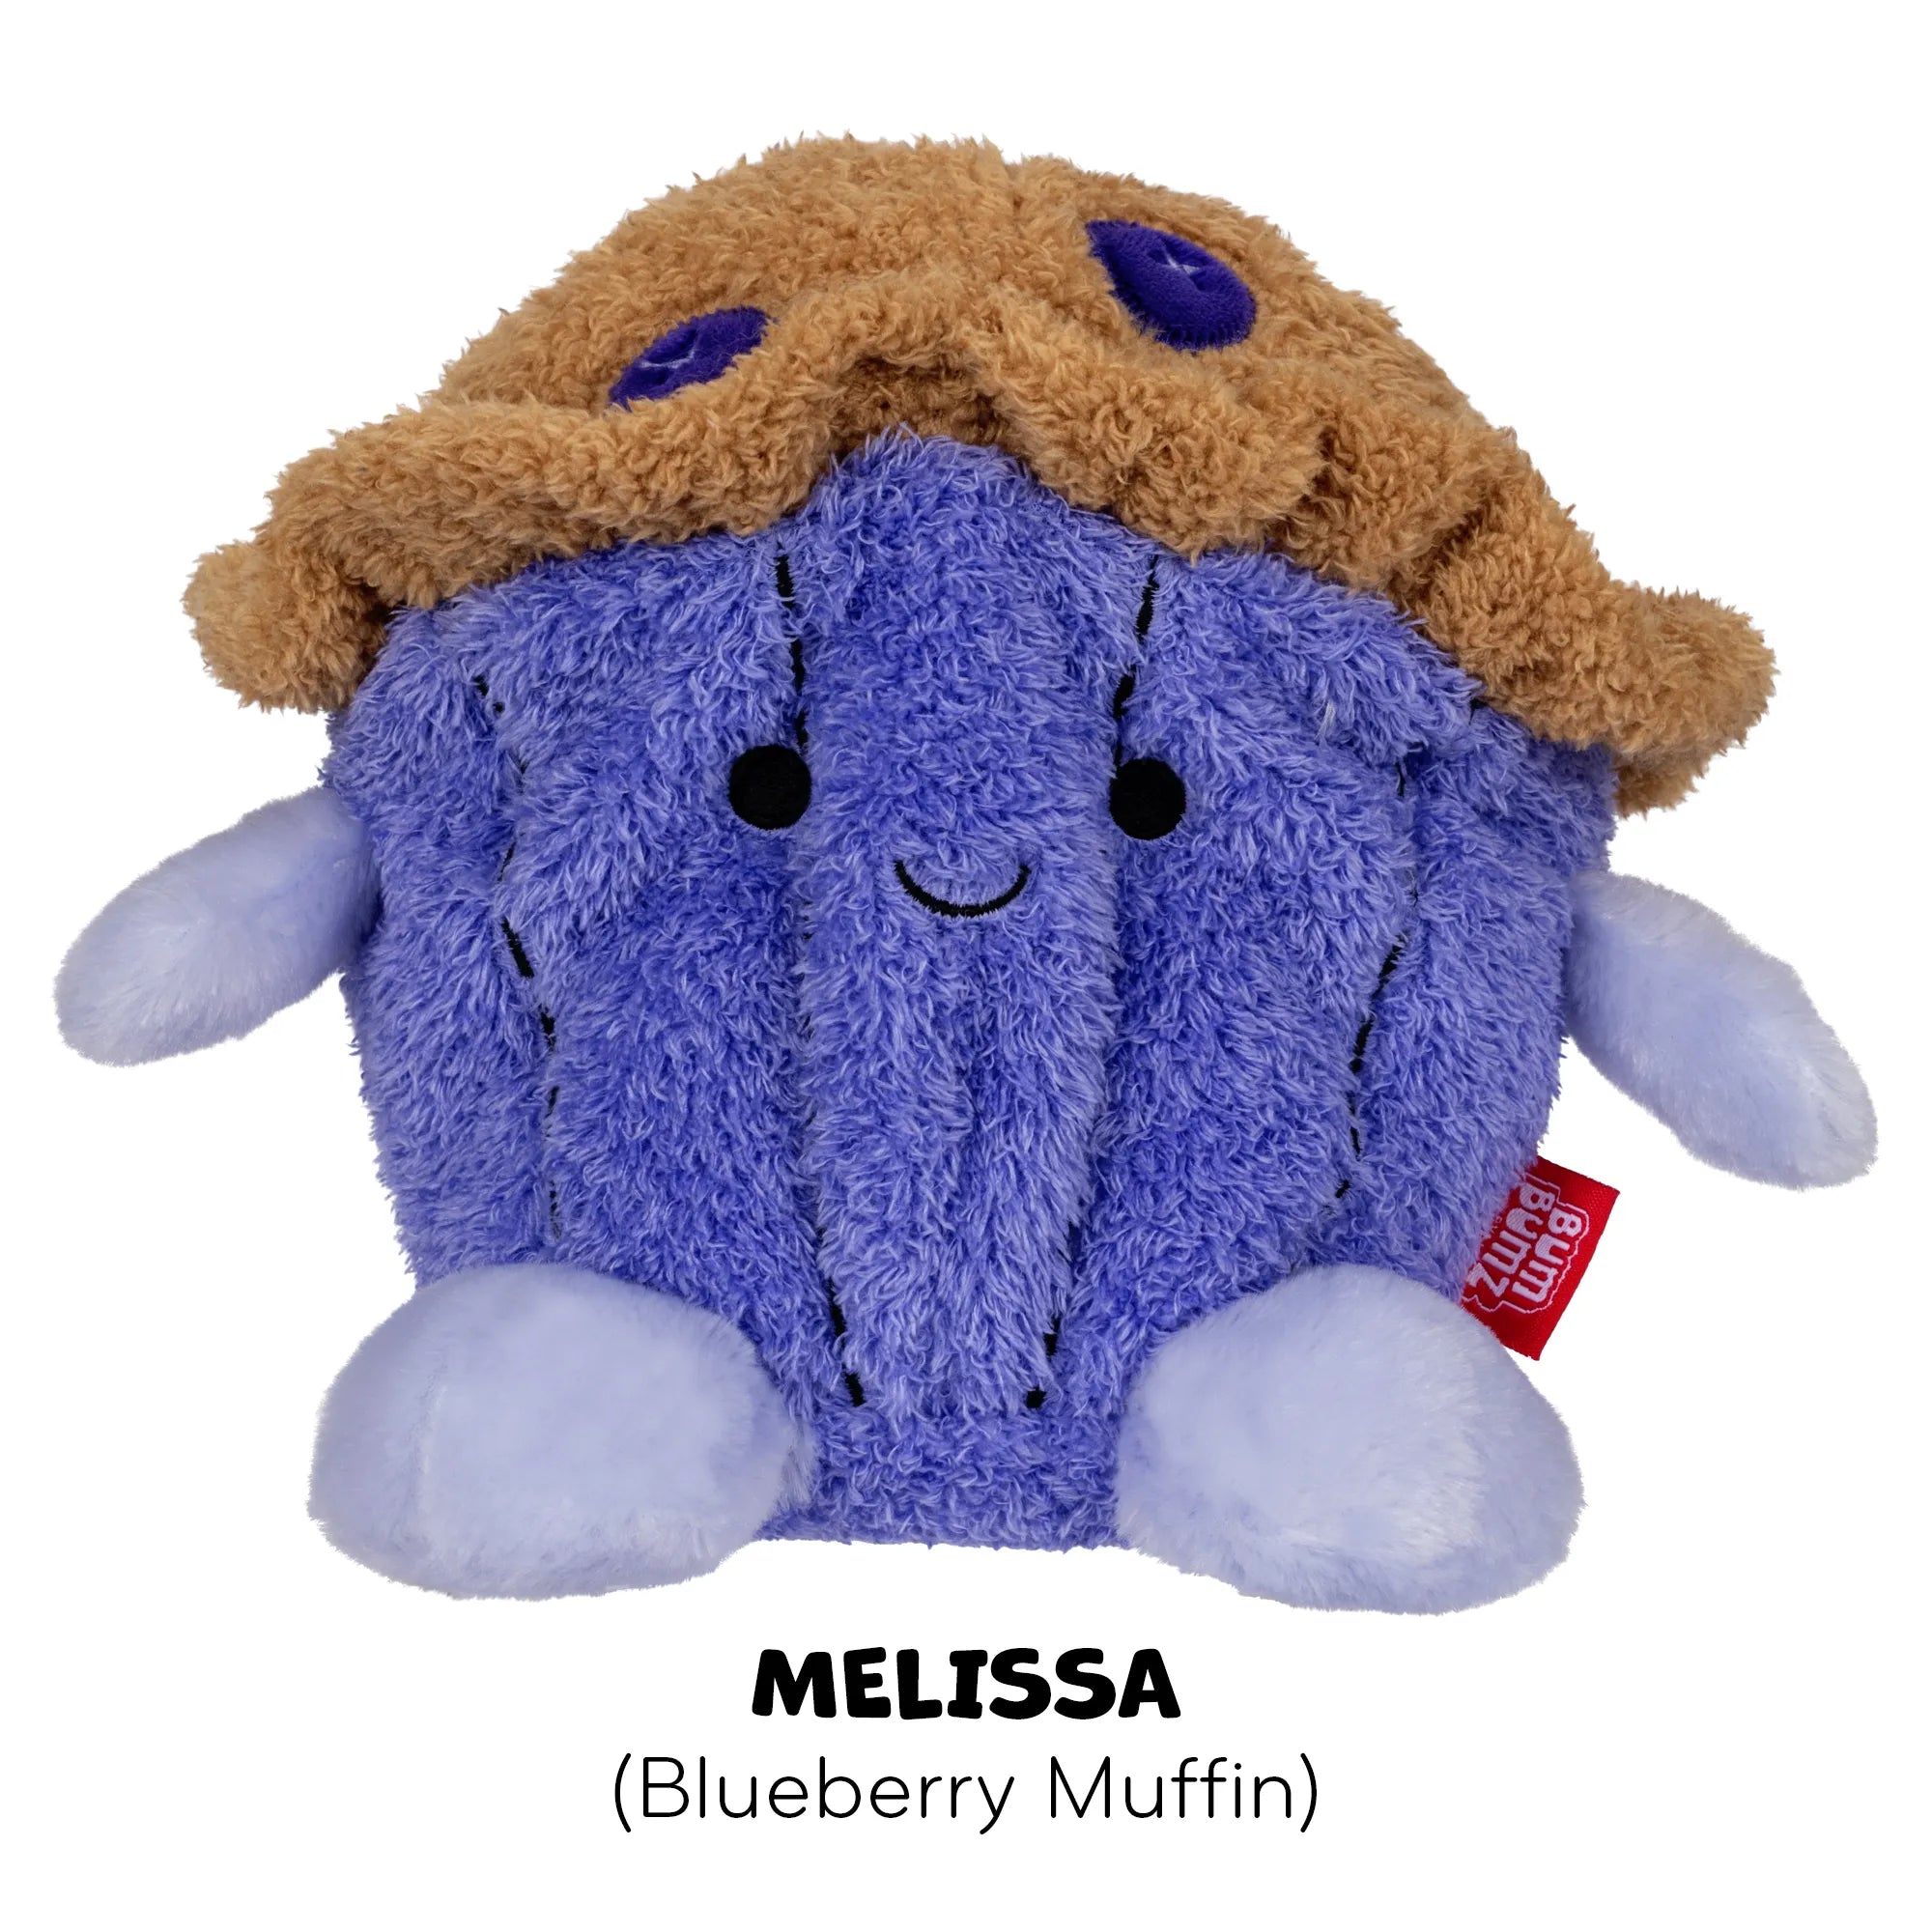 BumBumz Breakfast Series - 7.5” Collectibles - Blueberry Muffin 'Melissa' - Ages 3-Adult - Brown's Hobby & Game